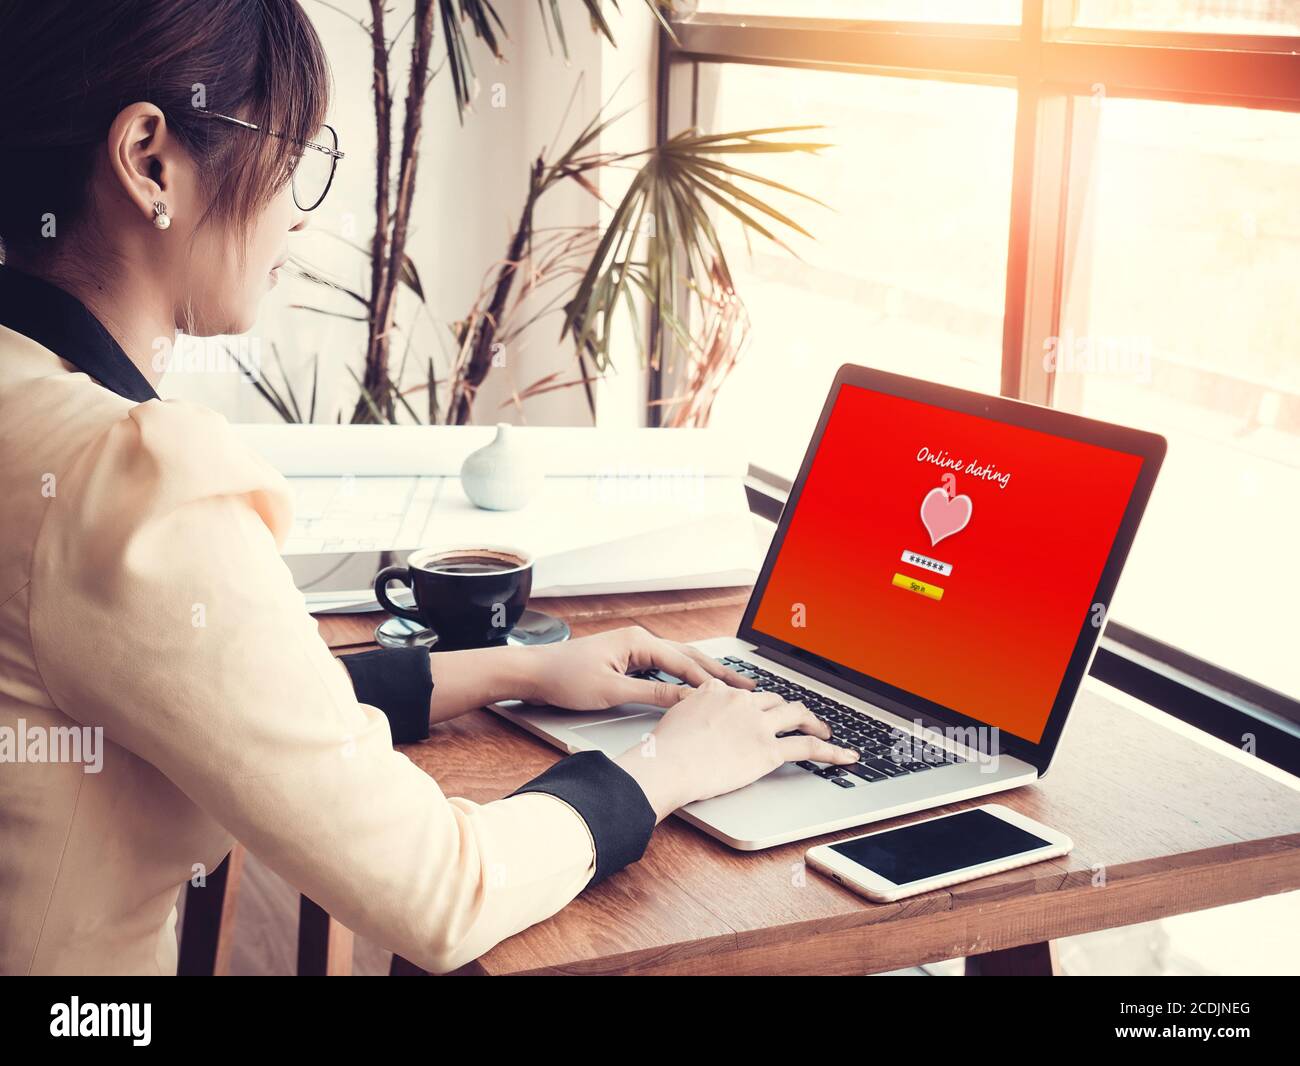 online love concept: office girl using online dating website on a laptop display, hardwood desktop and stationery on background Stock Photo